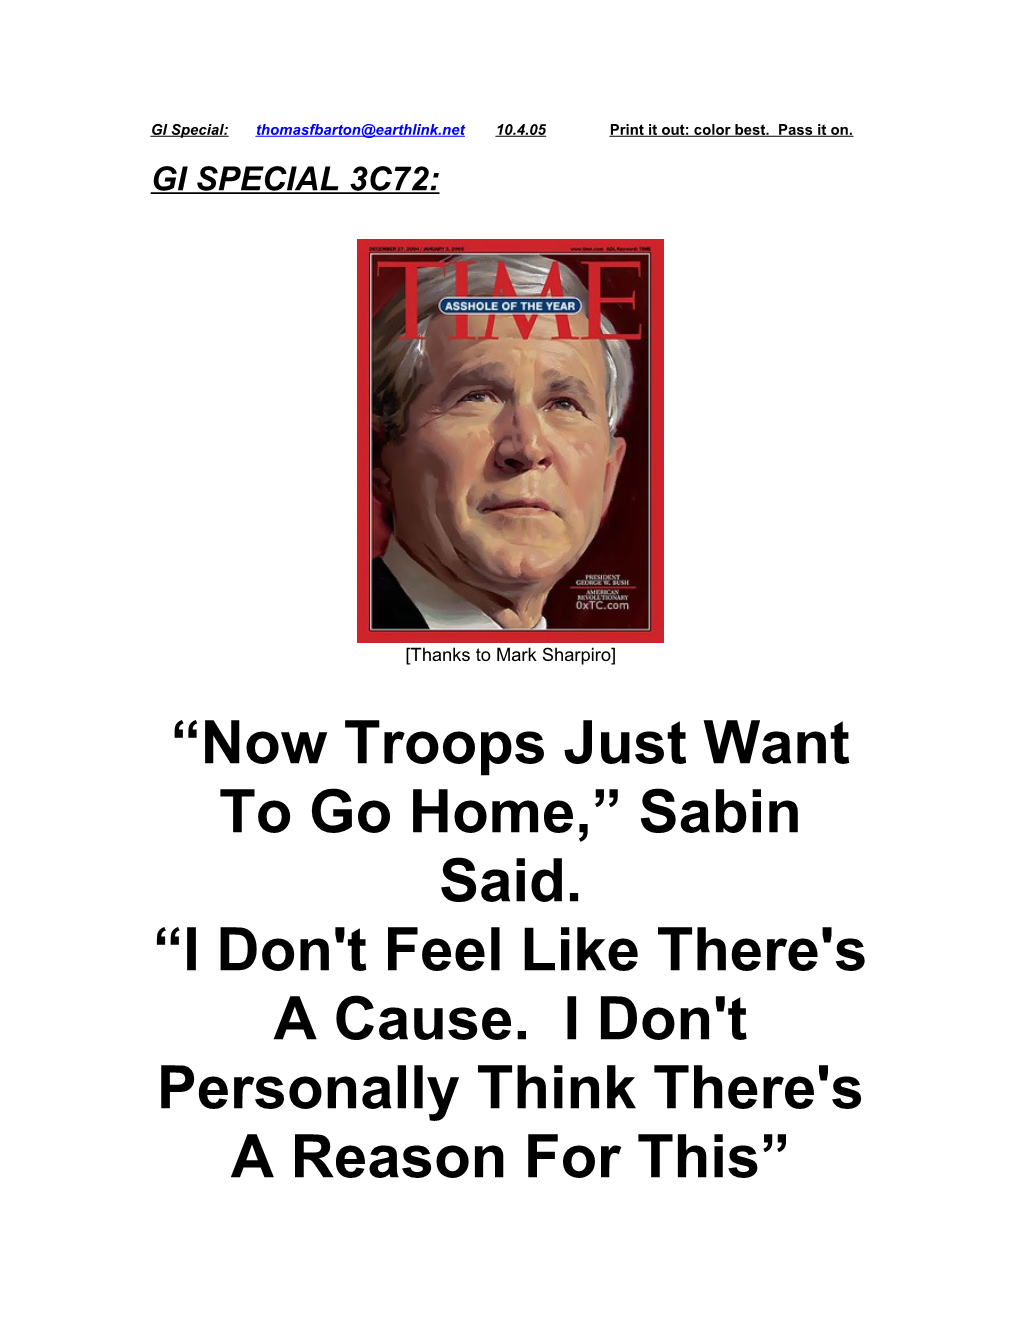 Now Troops Just Want to Go Home, Sabin Said